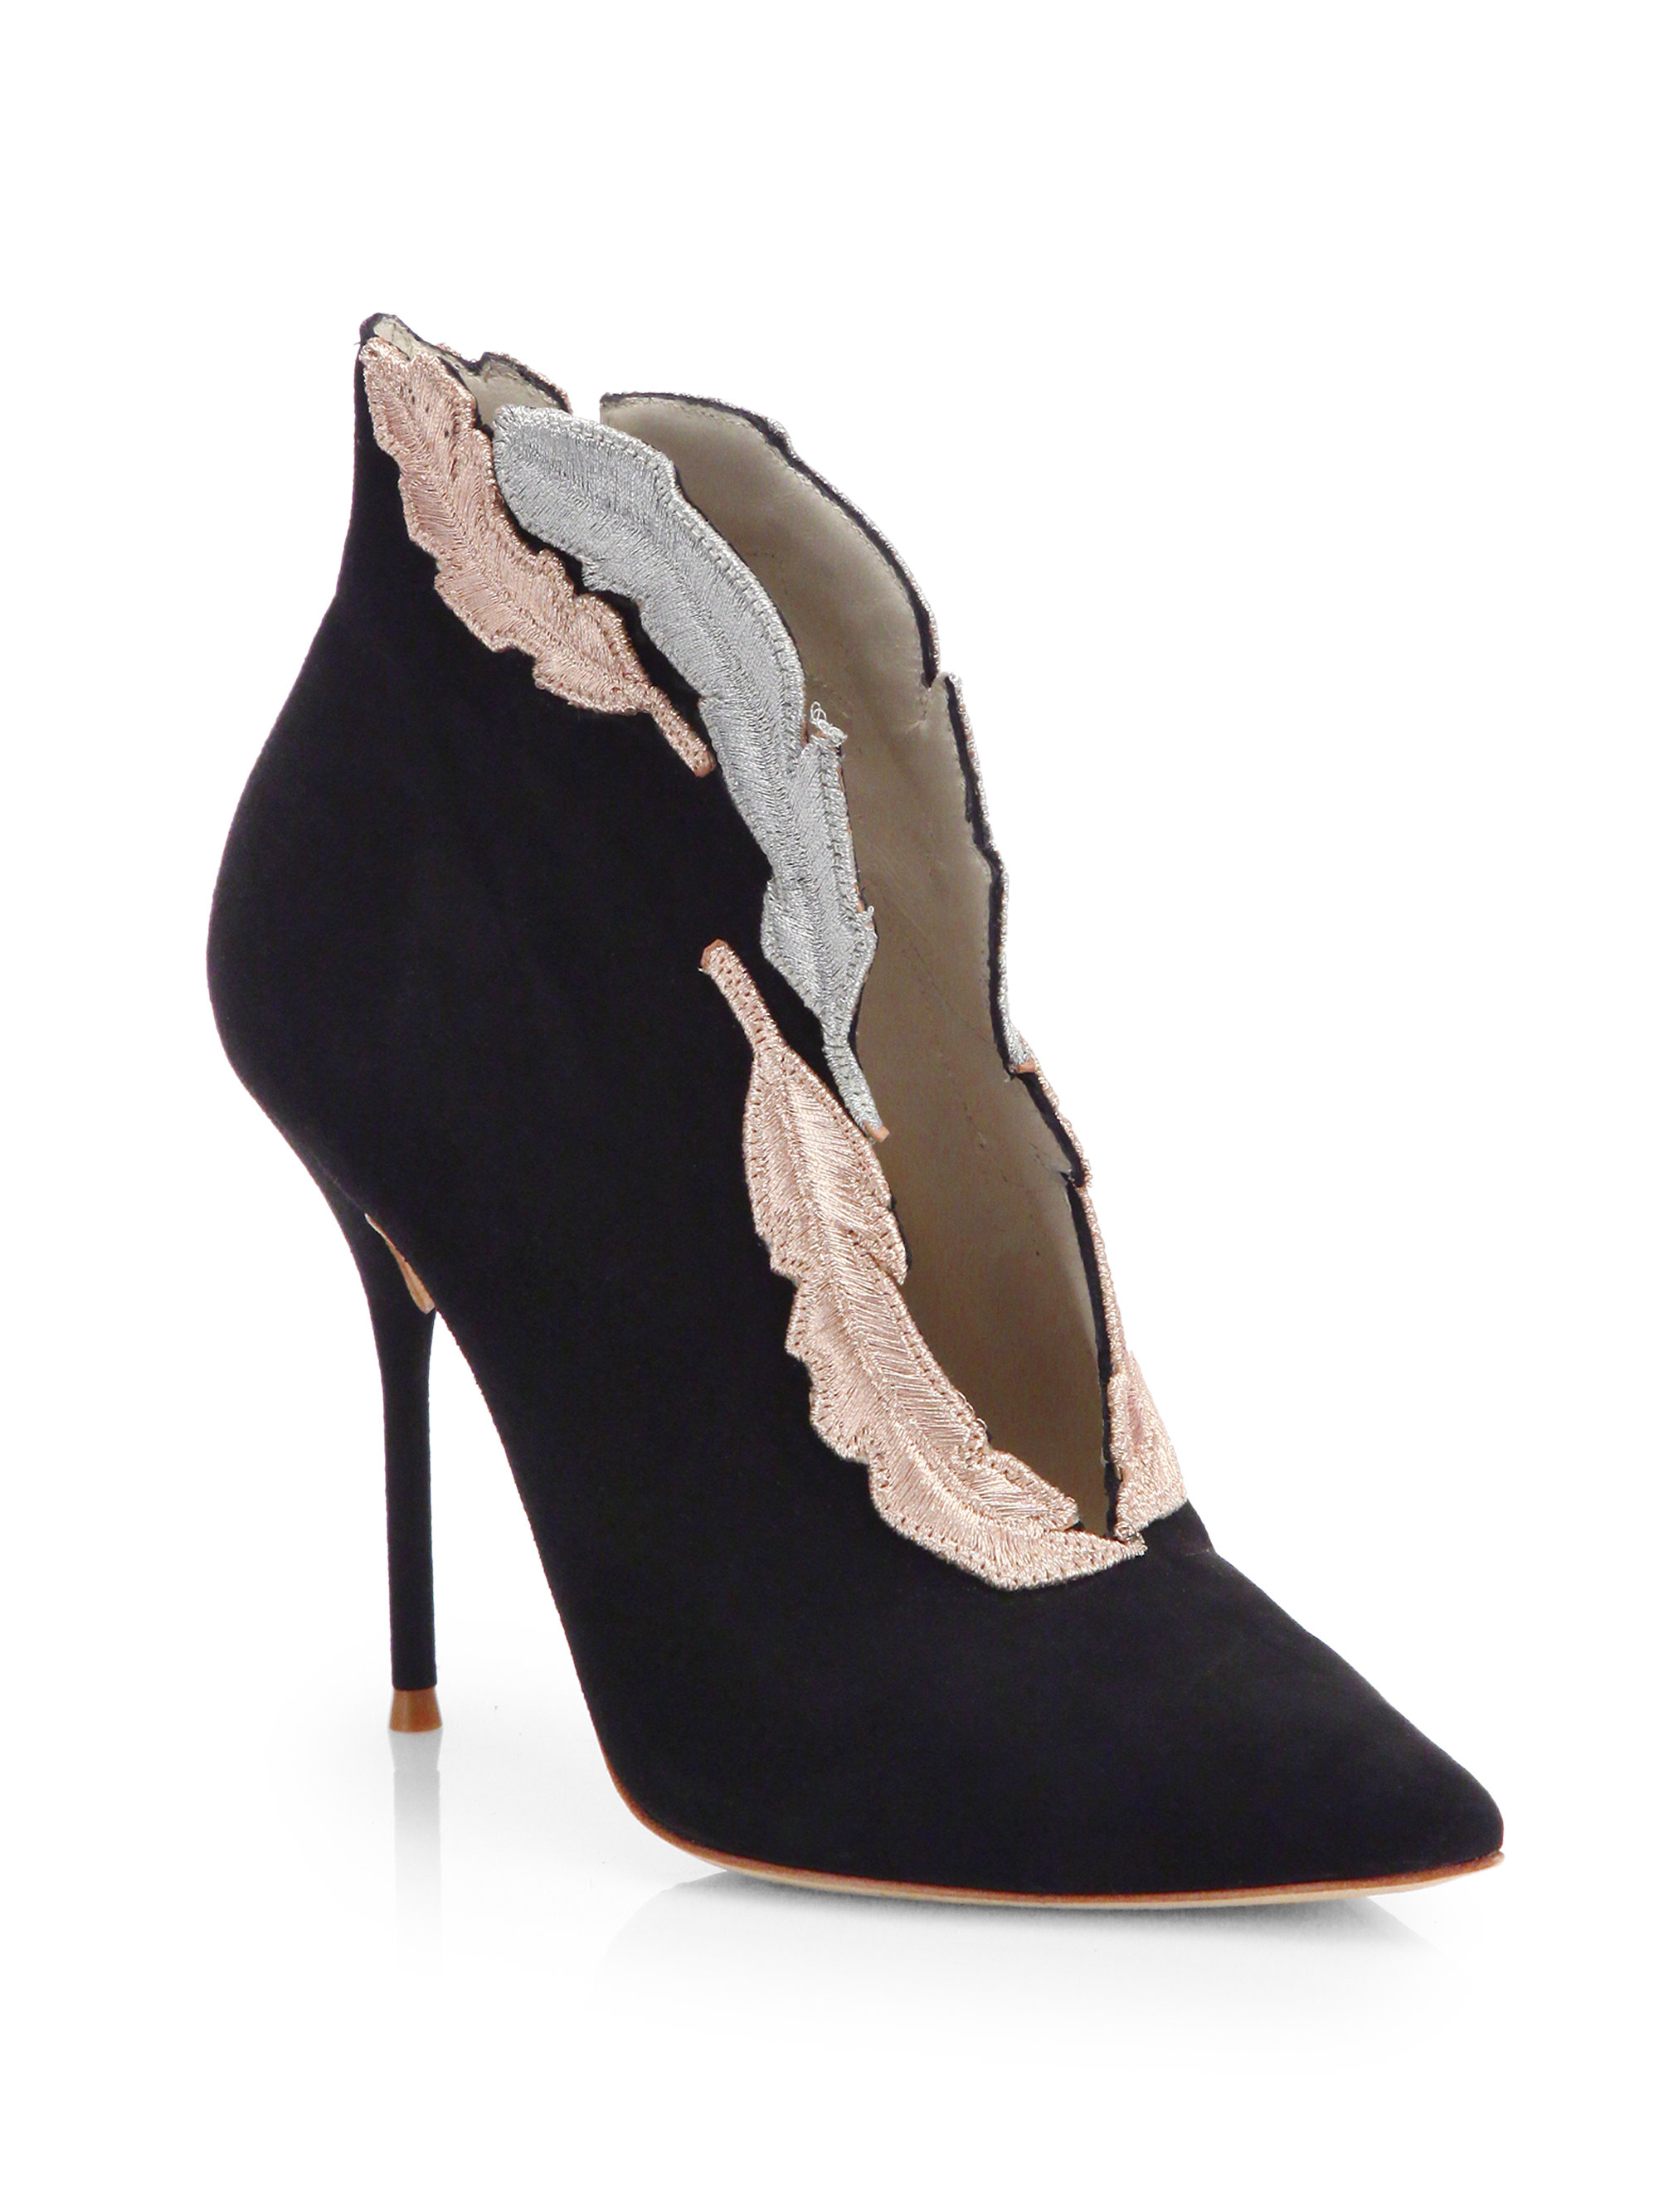 Sophia Webster Tia Suede Featherembroidered Ankle Boots in Black | Lyst